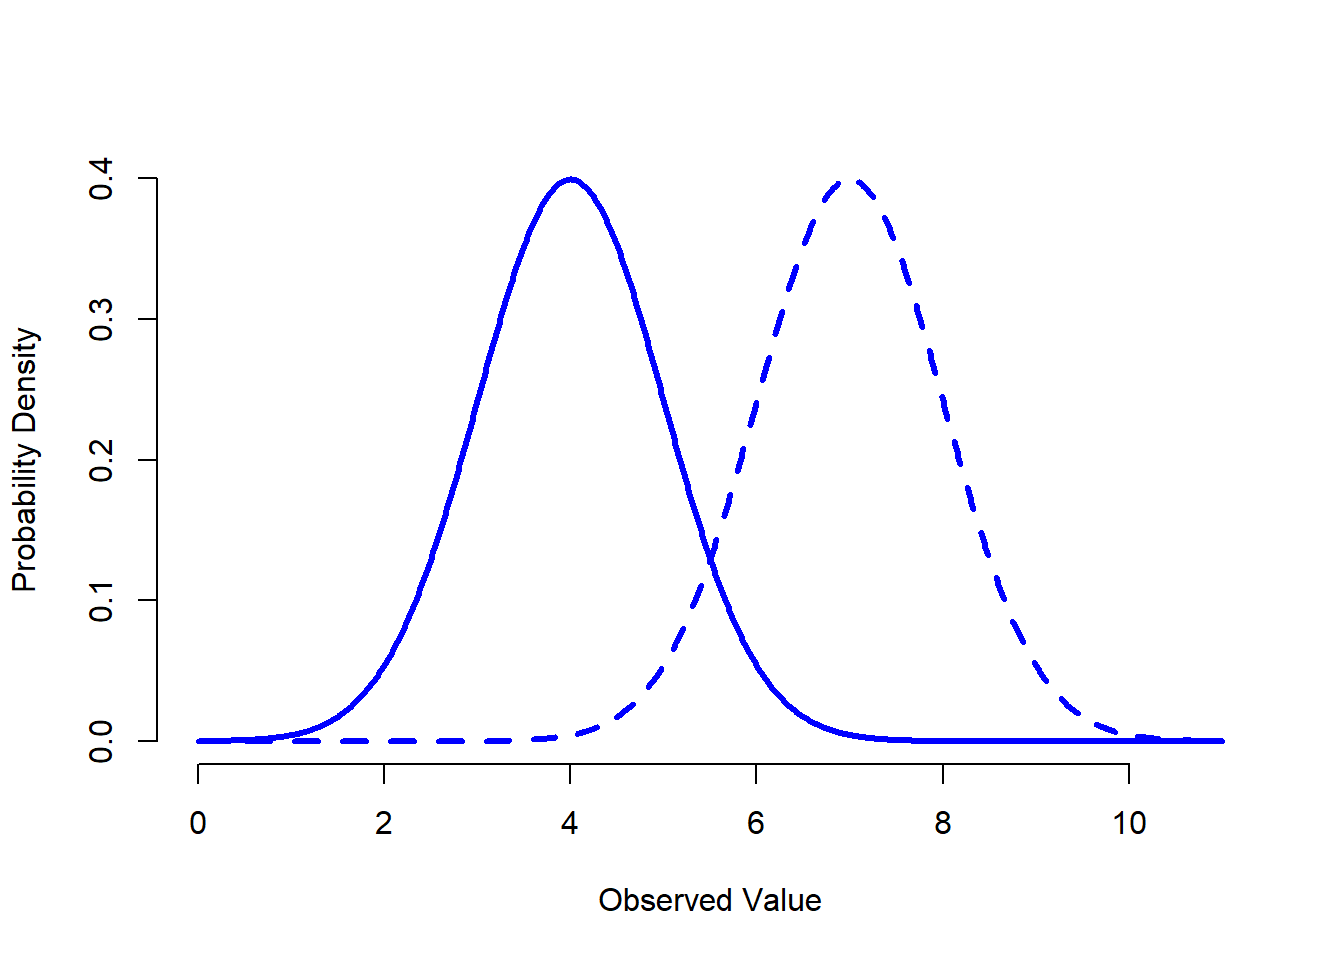 An illustration of what happens when you change the mean of a normal distribution. The solid line depicts a normal distribution with a mean of $mu=4$. The dashed line shows a normal distribution with a mean of $mu=7$. In both cases, the standard deviation is $sigma=1$. Not surprisingly, the two distributions have the same shape, but the dashed line is shifted to the right.